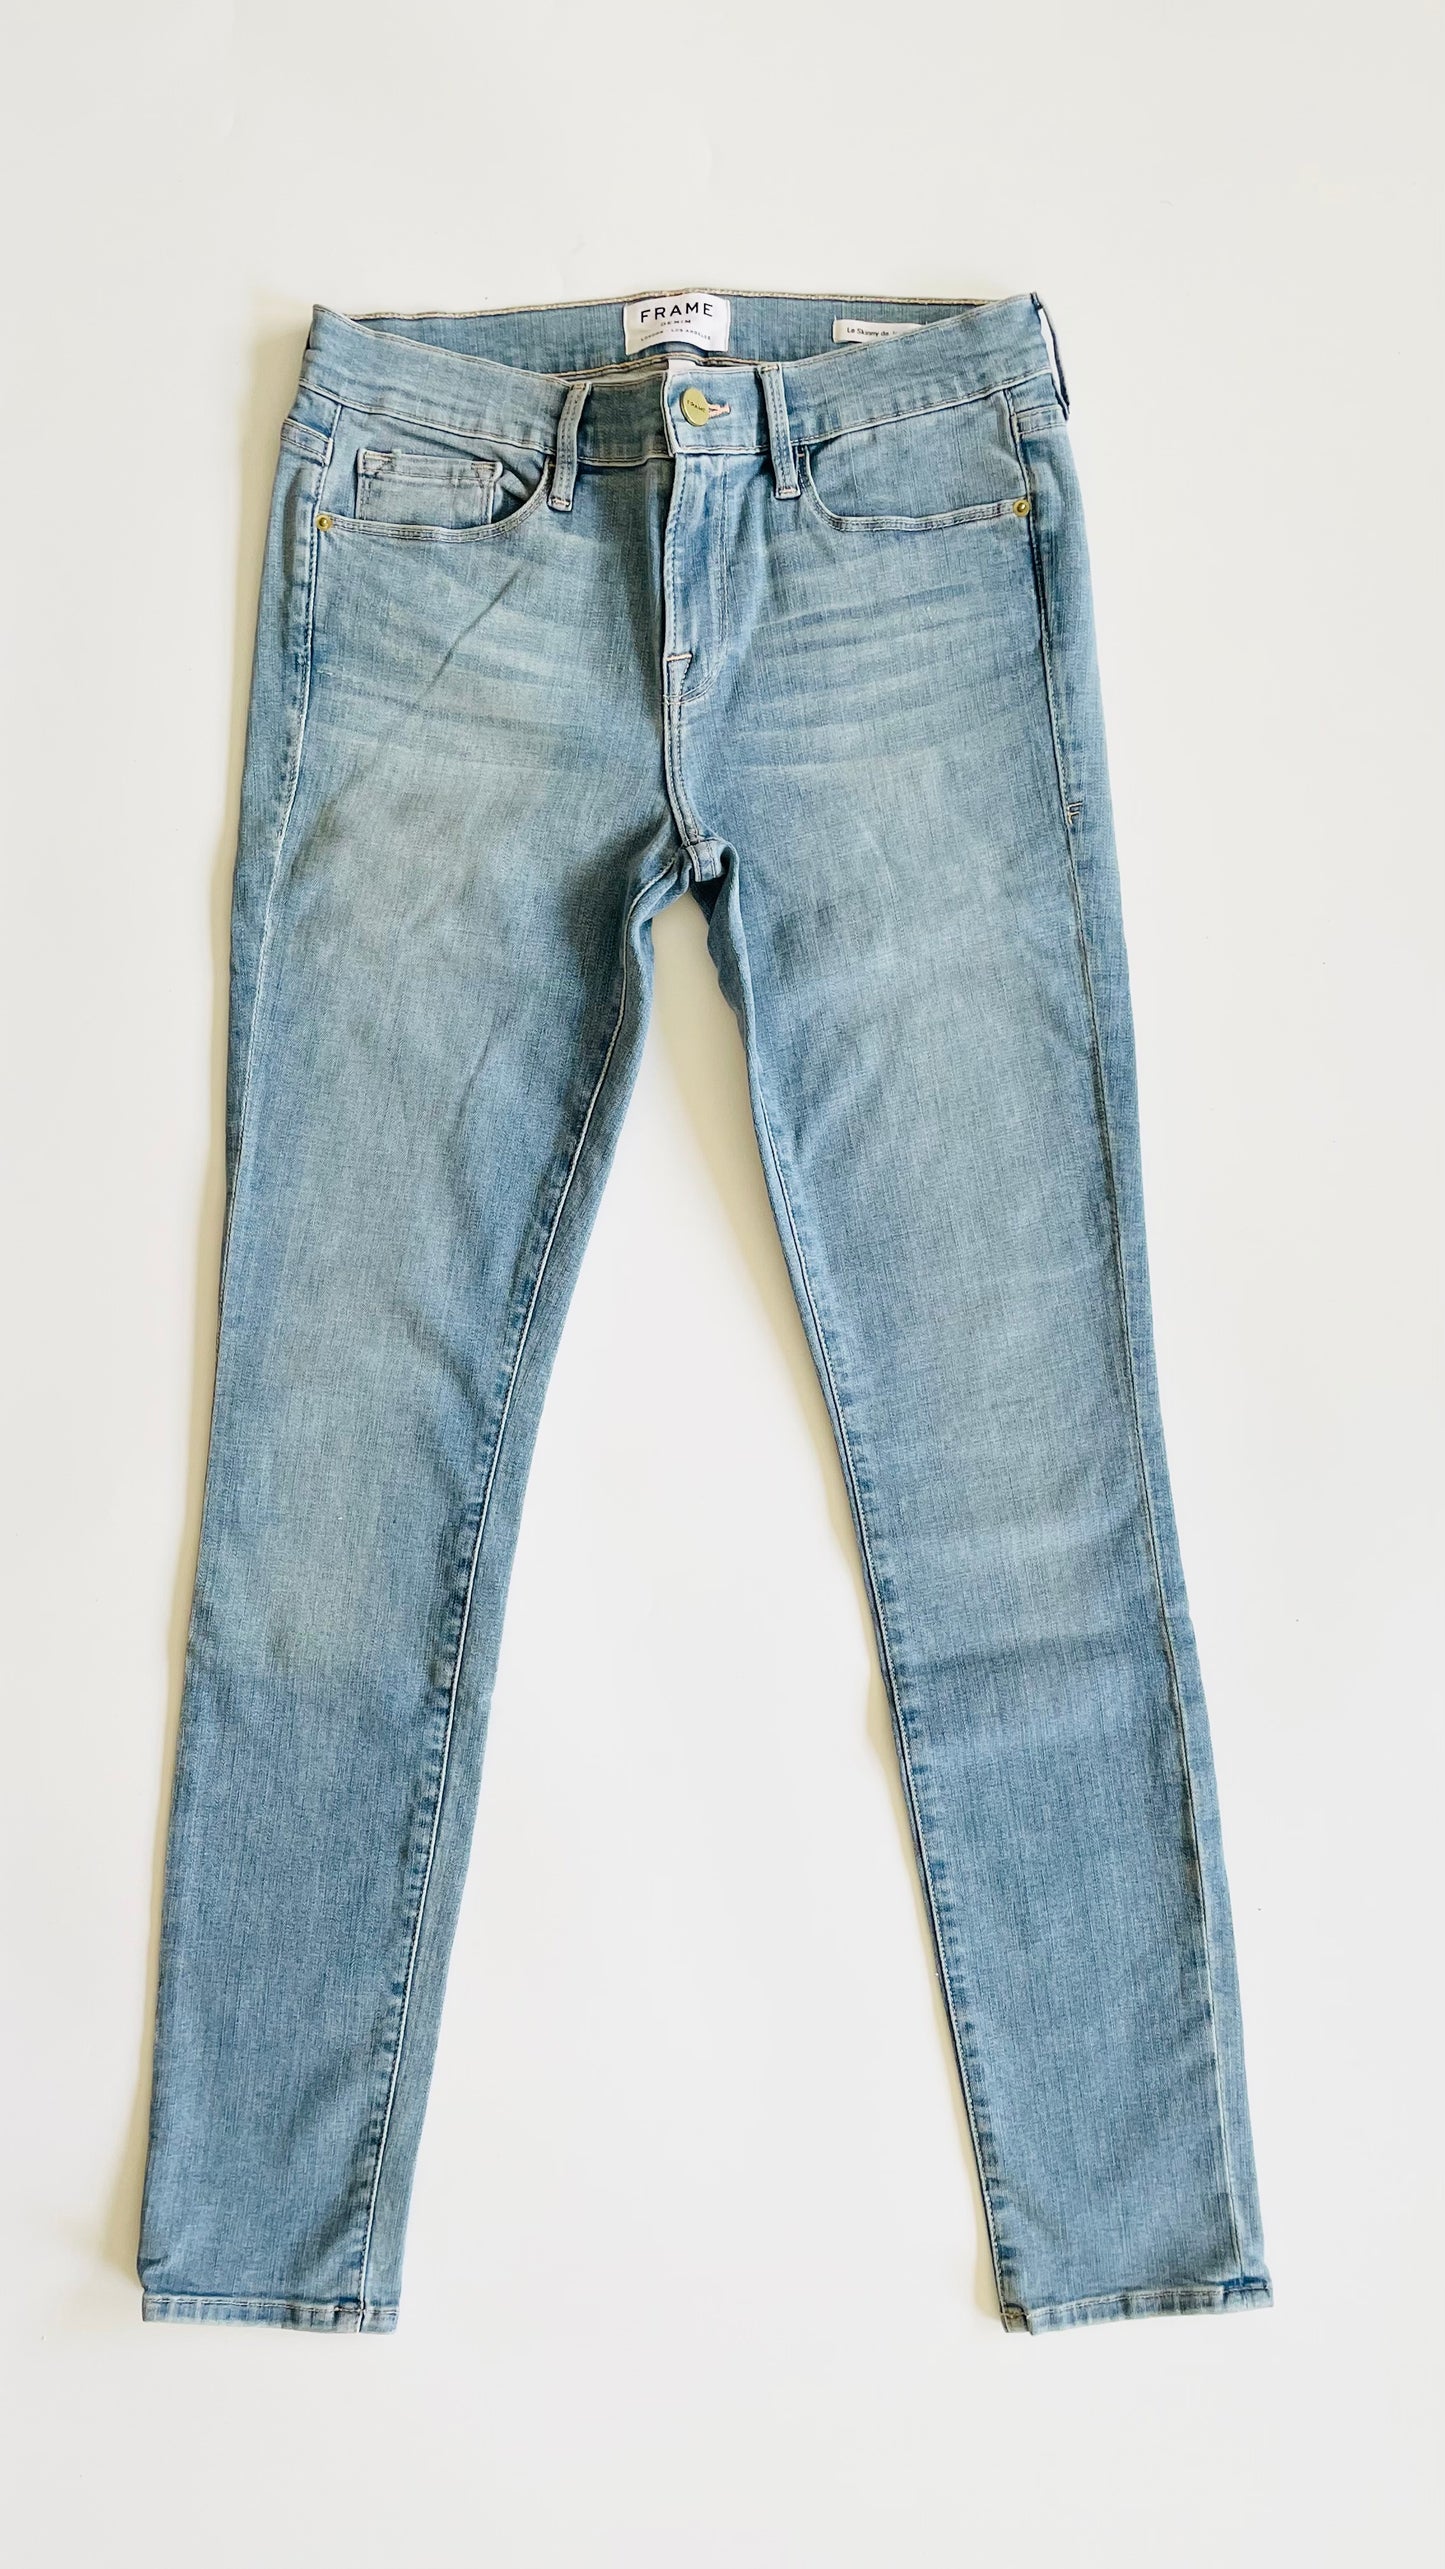 Pre-Loved FRAME light wash skinny jeans NWT - Size 29 x 30